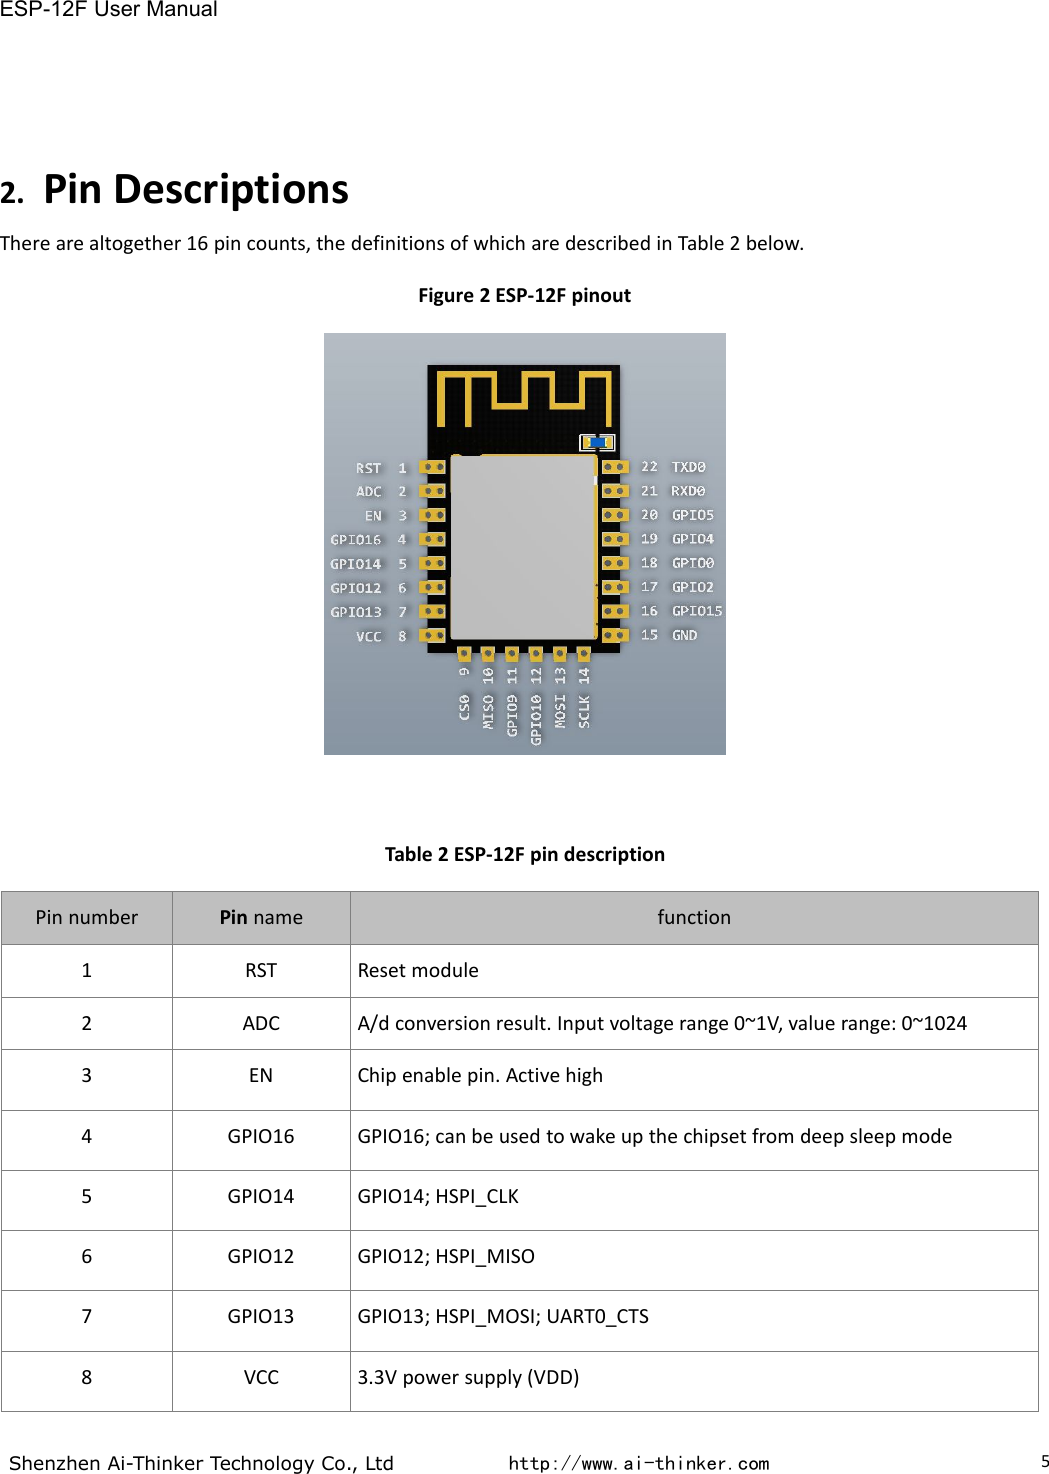 ESP-12F User ManualShenzhen Ai-Thinker Technology Co., Ltd http://www.ai-thinker.com52. Pin DescriptionsThere are altogether 16 pin counts, the definitions of which are described in Table 2 below.Figure 2 ESP-12F pinoutTable 2 ESP-12F pin descriptionPin numberPin namefunction1RSTReset module2ADCA/d conversion result. Input voltage range 0~1V, value range: 0~10243ENChip enable pin. Active high4GPIO16GPIO16; can be used to wake up the chipset from deep sleep mode5GPIO14GPIO14; HSPI_CLK6GPIO12GPIO12; HSPI_MISO7GPIO13GPIO13; HSPI_MOSI; UART0_CTS8VCC3.3V power supply (VDD)